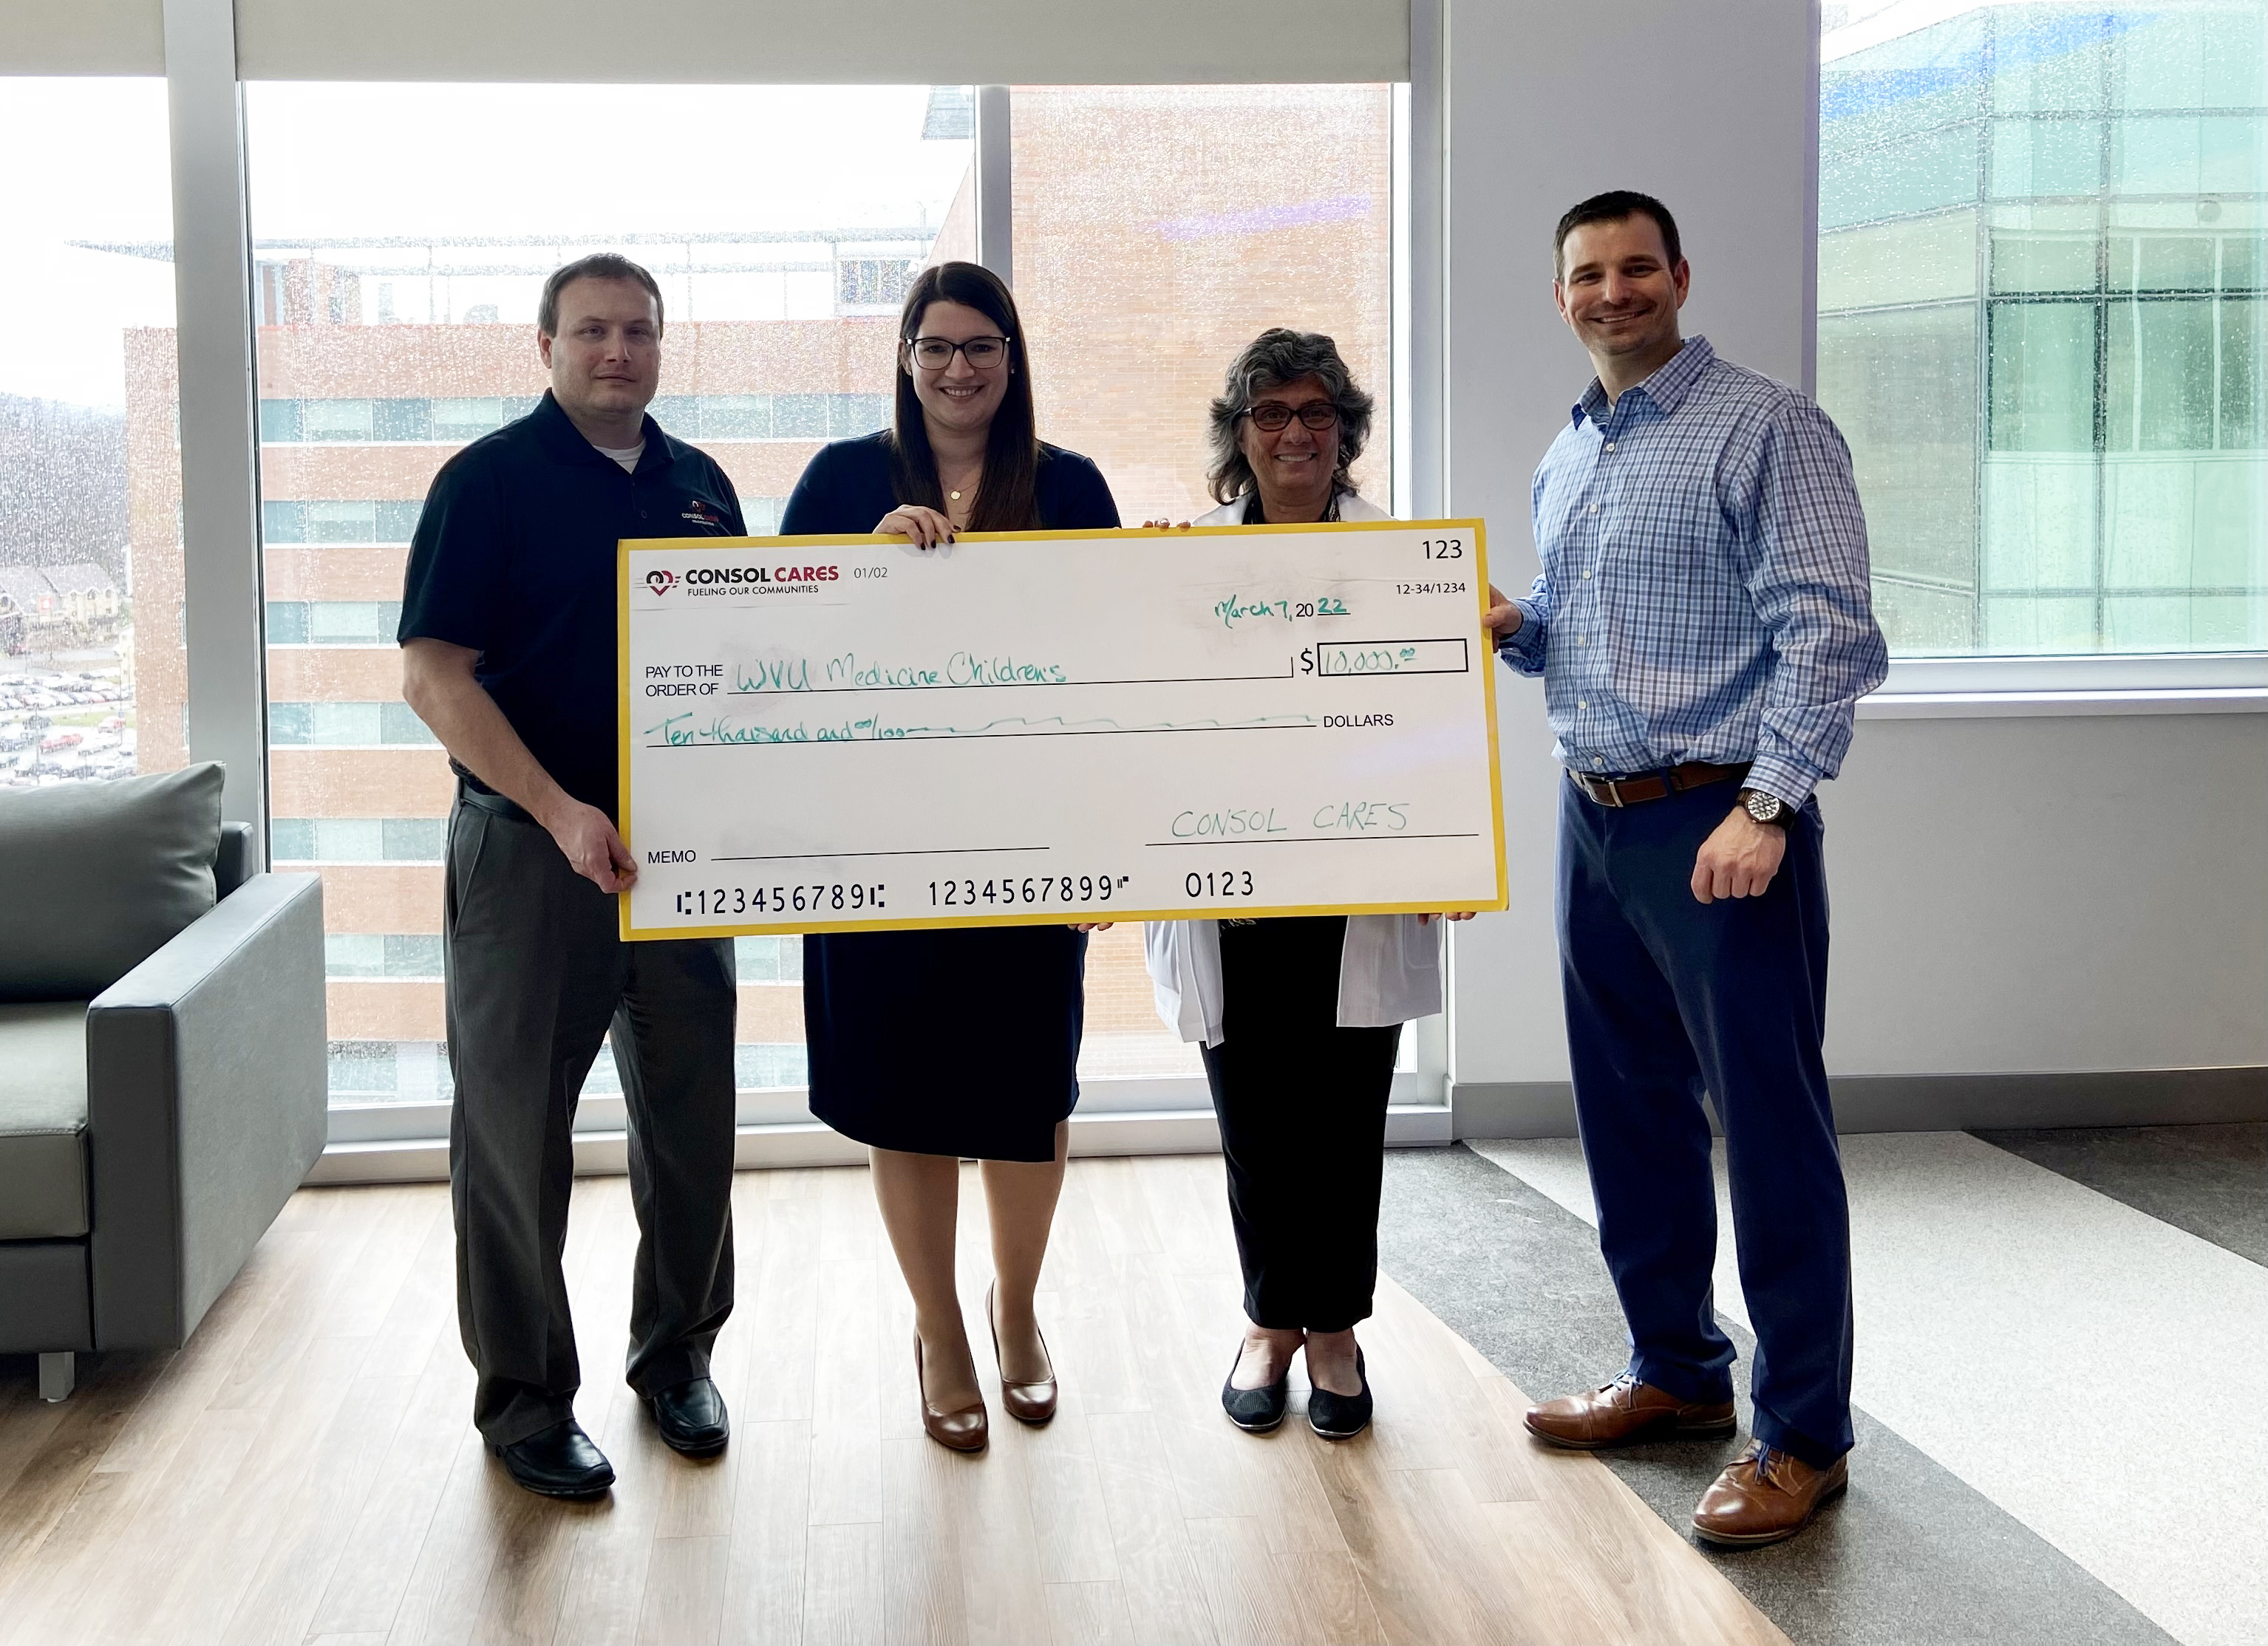 CONSOL Cares Foundation representatives Andrew Chumney (far left) and Christopher Rabbitt (far right) present their contribution to Rachel Blasko (center, left), assistant vice president for operations at WVU Medicine Children’s, and Mary Fanning (center, right), vice president of nursing clinical services and associate chief nursing officer for WVU Medicine Children’s.